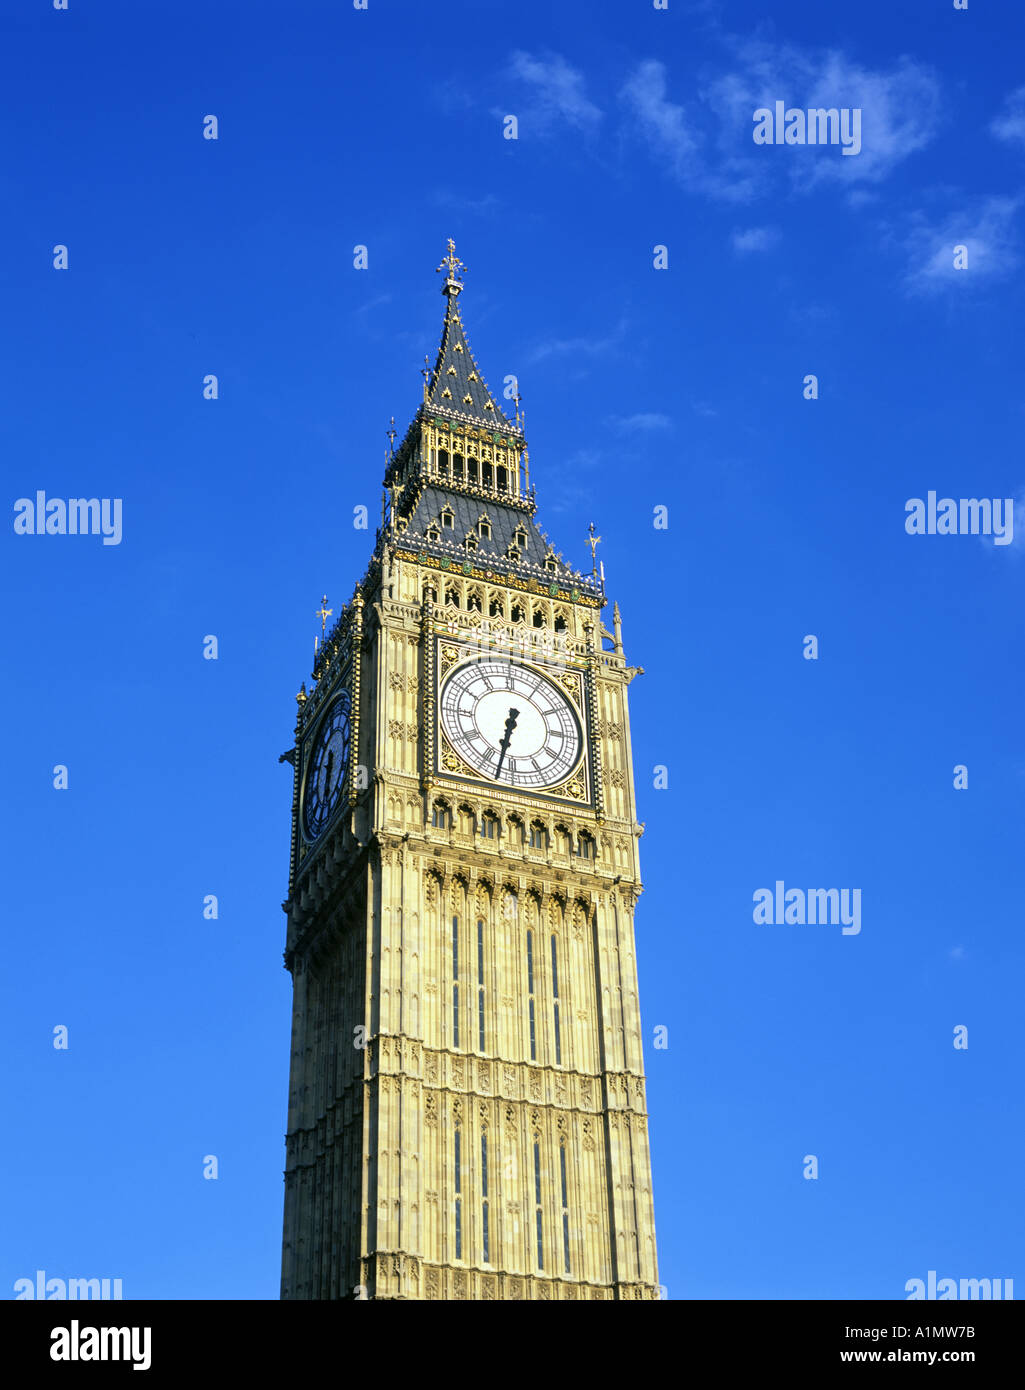 The Big Ben clock tower at the Westminster Houses of Parliament in London England Stock Photo